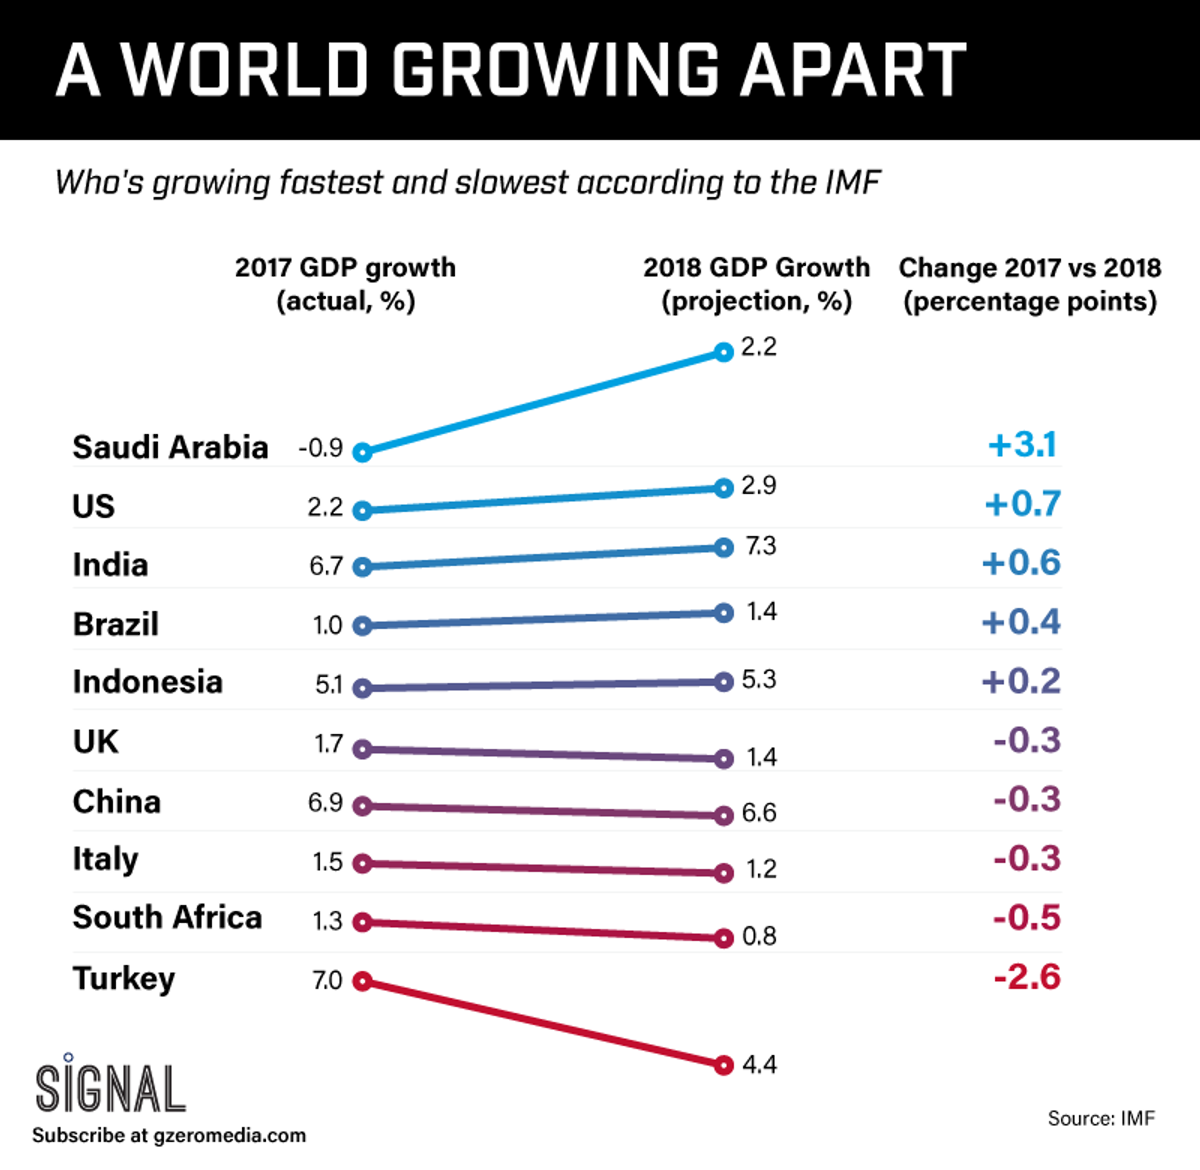 THE GRAPHIC TRUTH: A WORLD GROWING APART